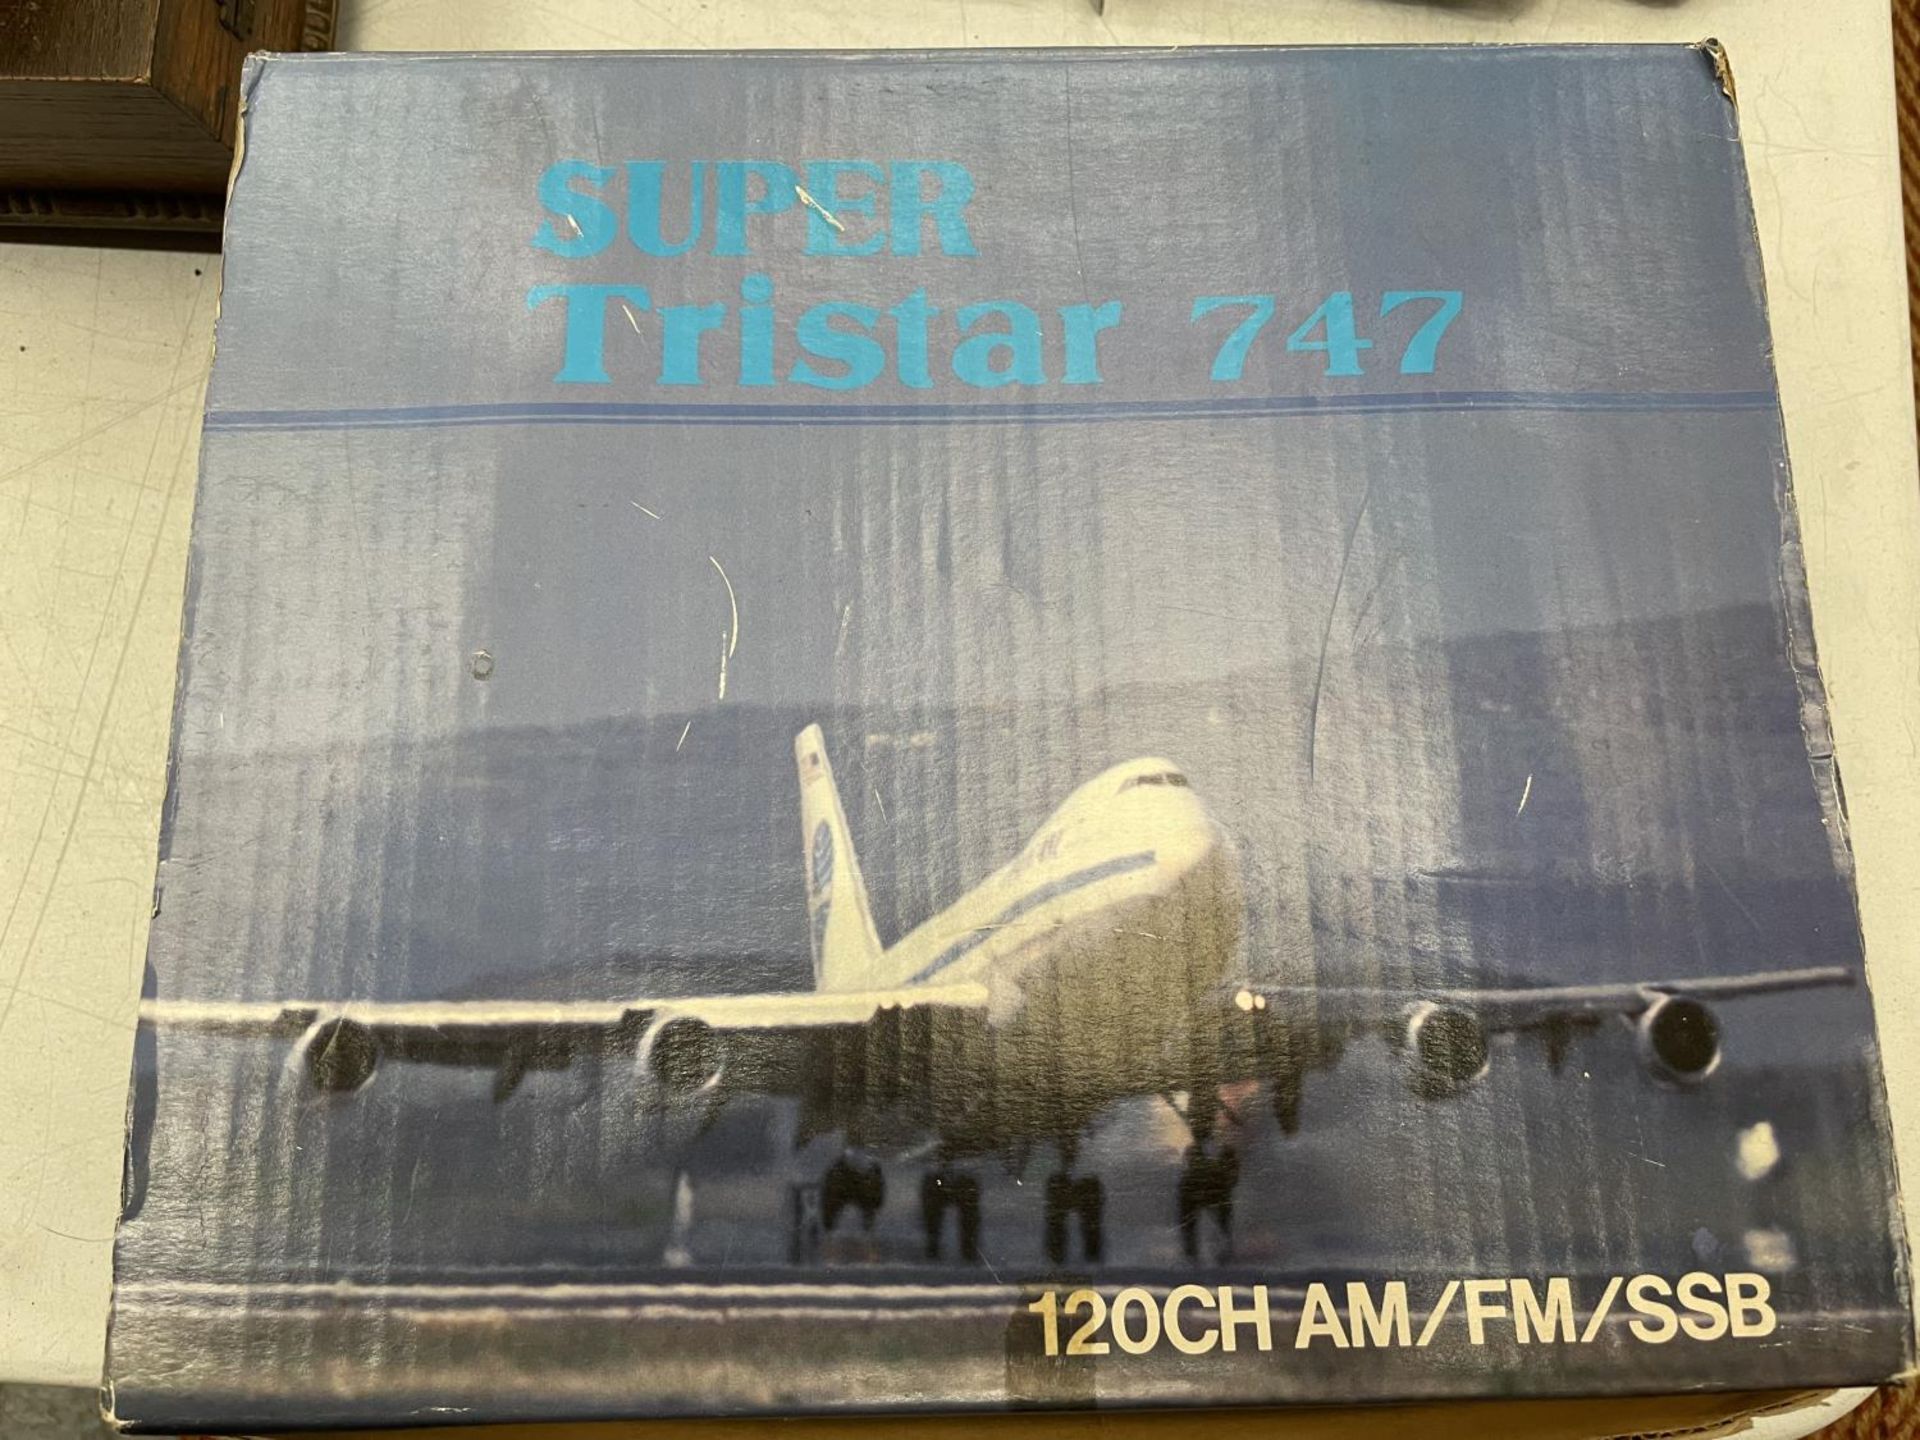 AN AS NEW BOXED SUPER TRISTAR 747 CB RADIO WITH INSTRUCTION MANUAL